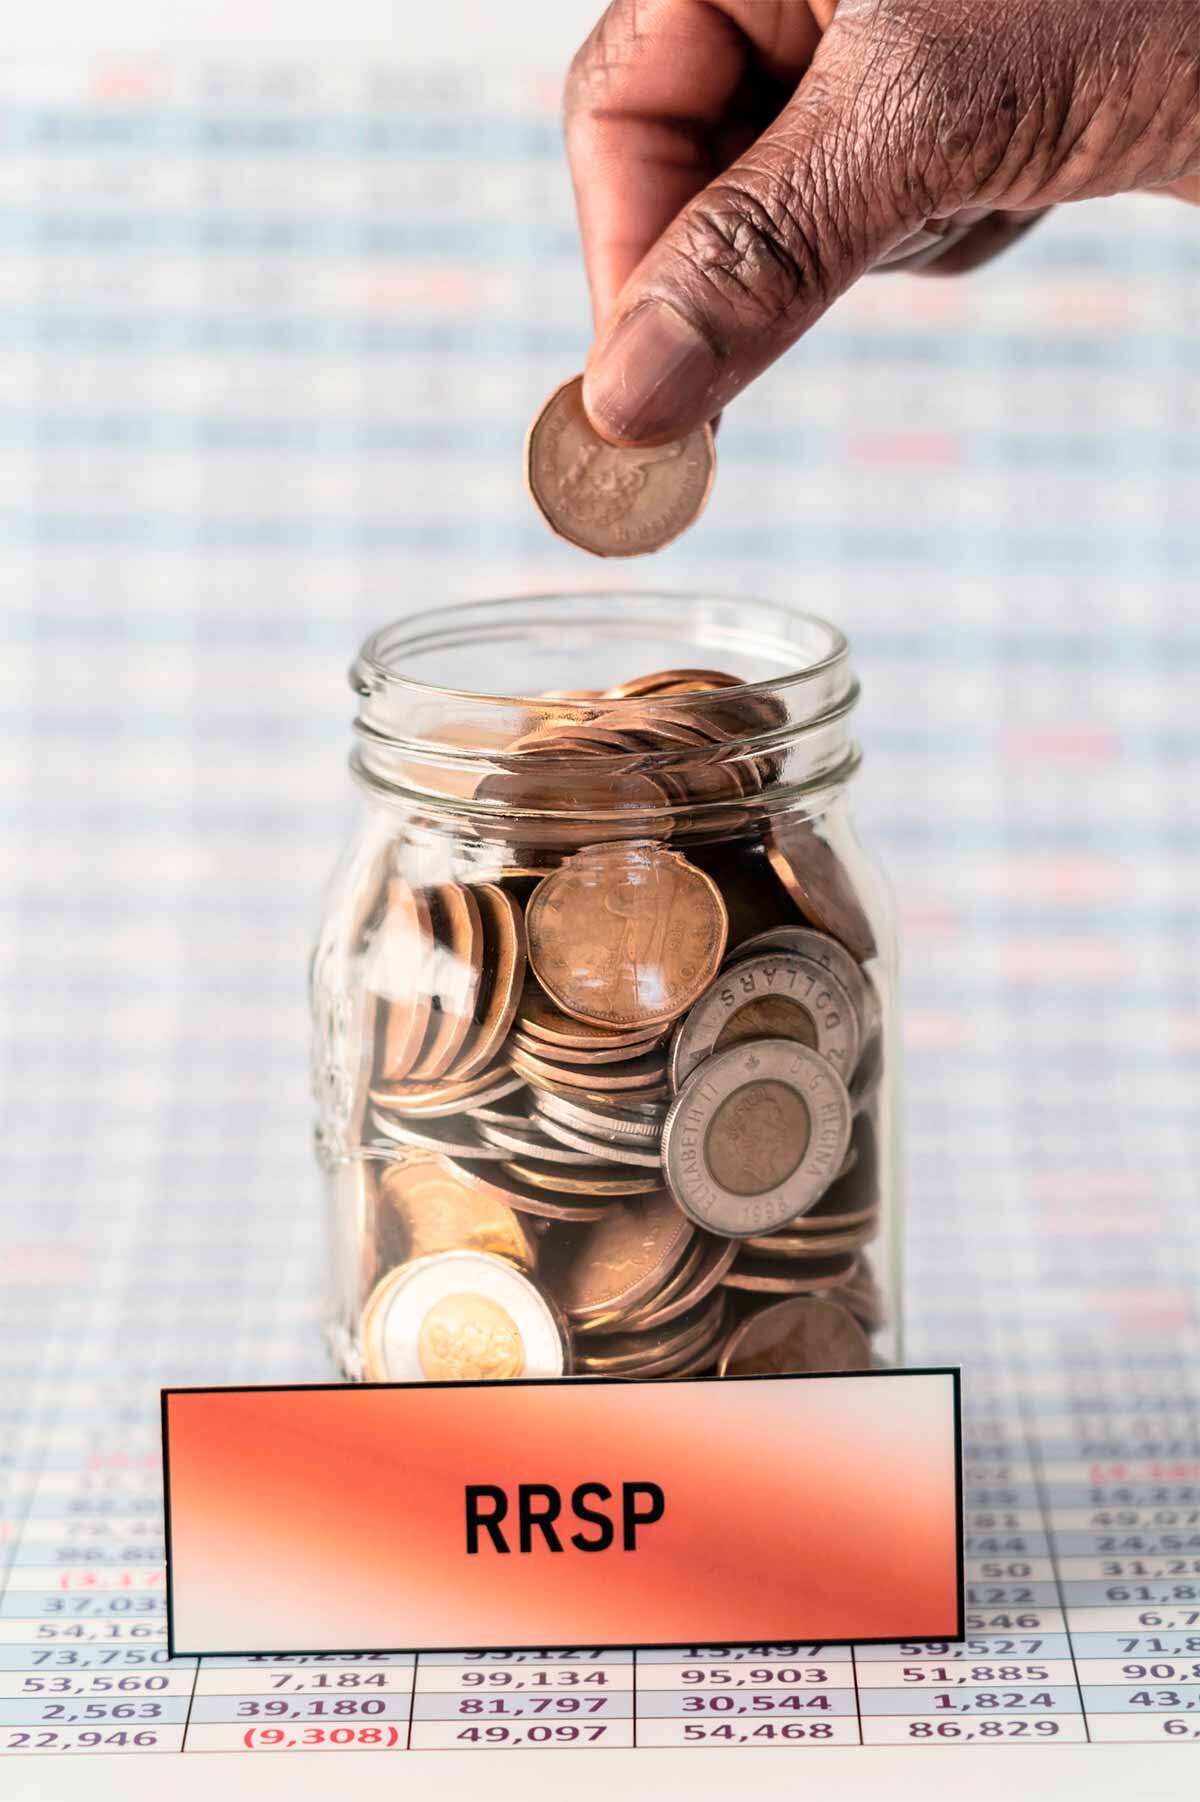 rrsp-season-2022-deadline-is-march-1-get-your-contributions-in-now-vfs